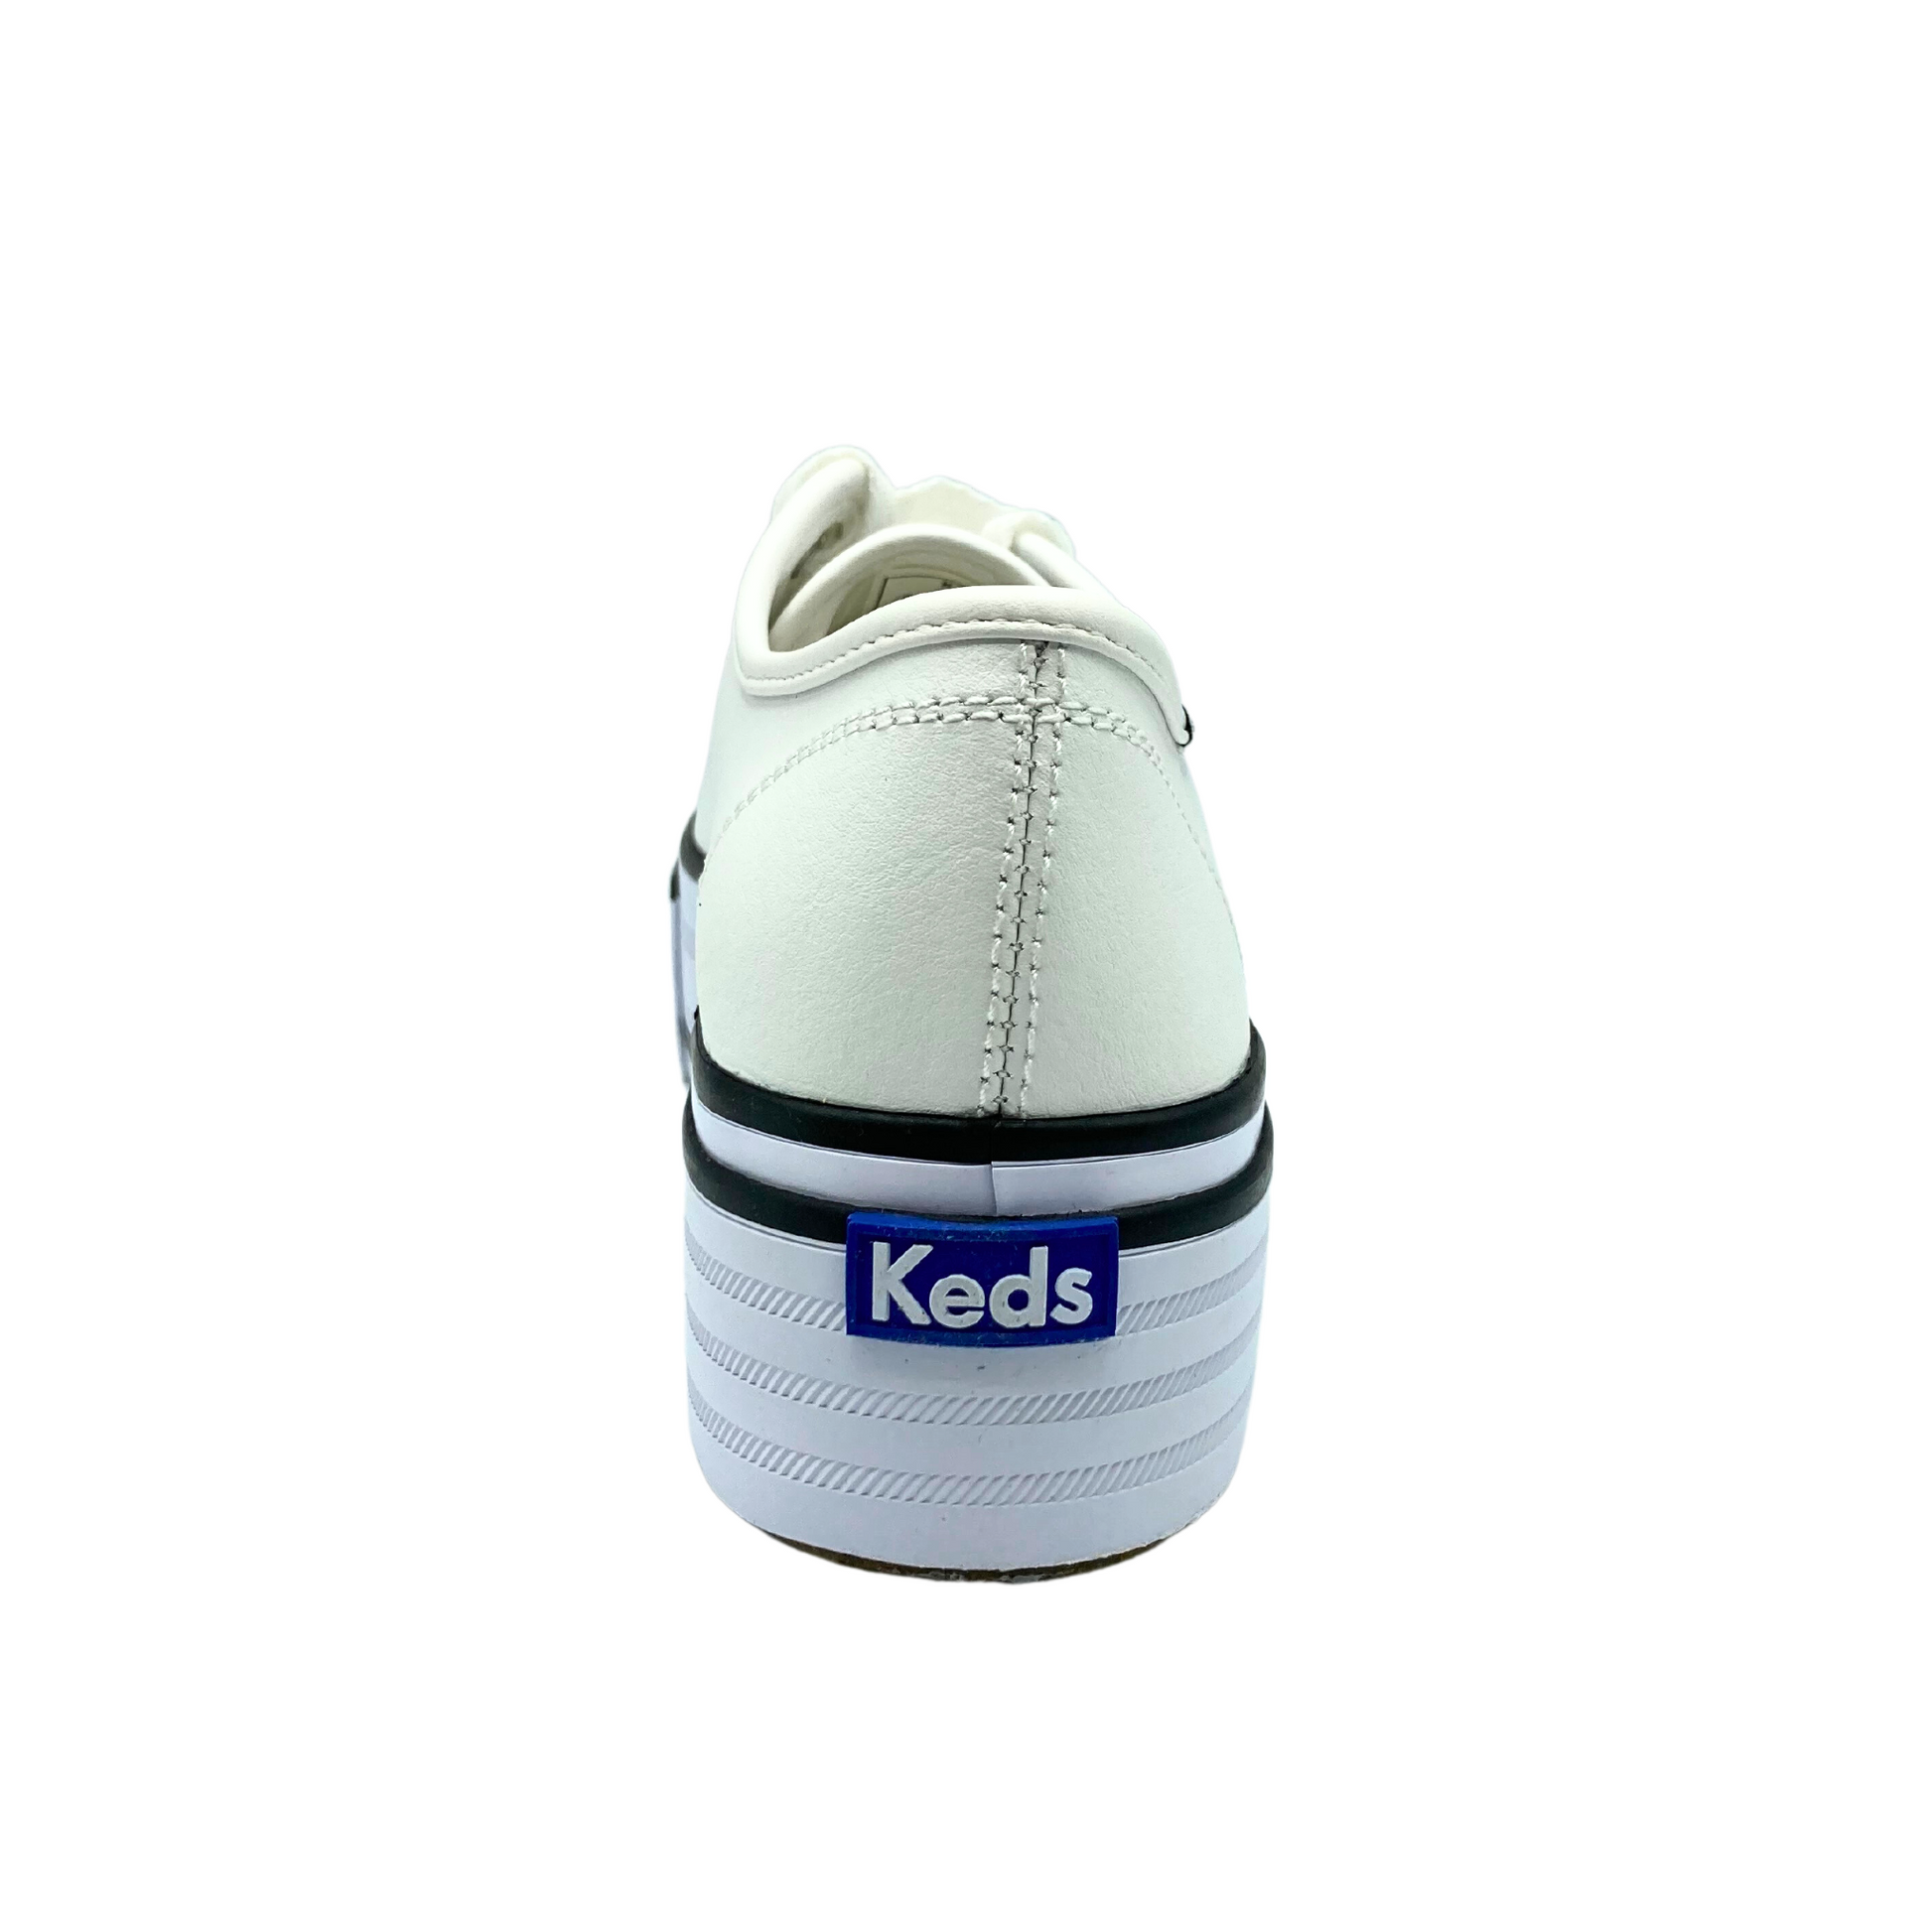 Rear view of a white leather sneaker on a platform sole.  Keds logo on outsole at the heel.  Dark stripes on outsole for contrast